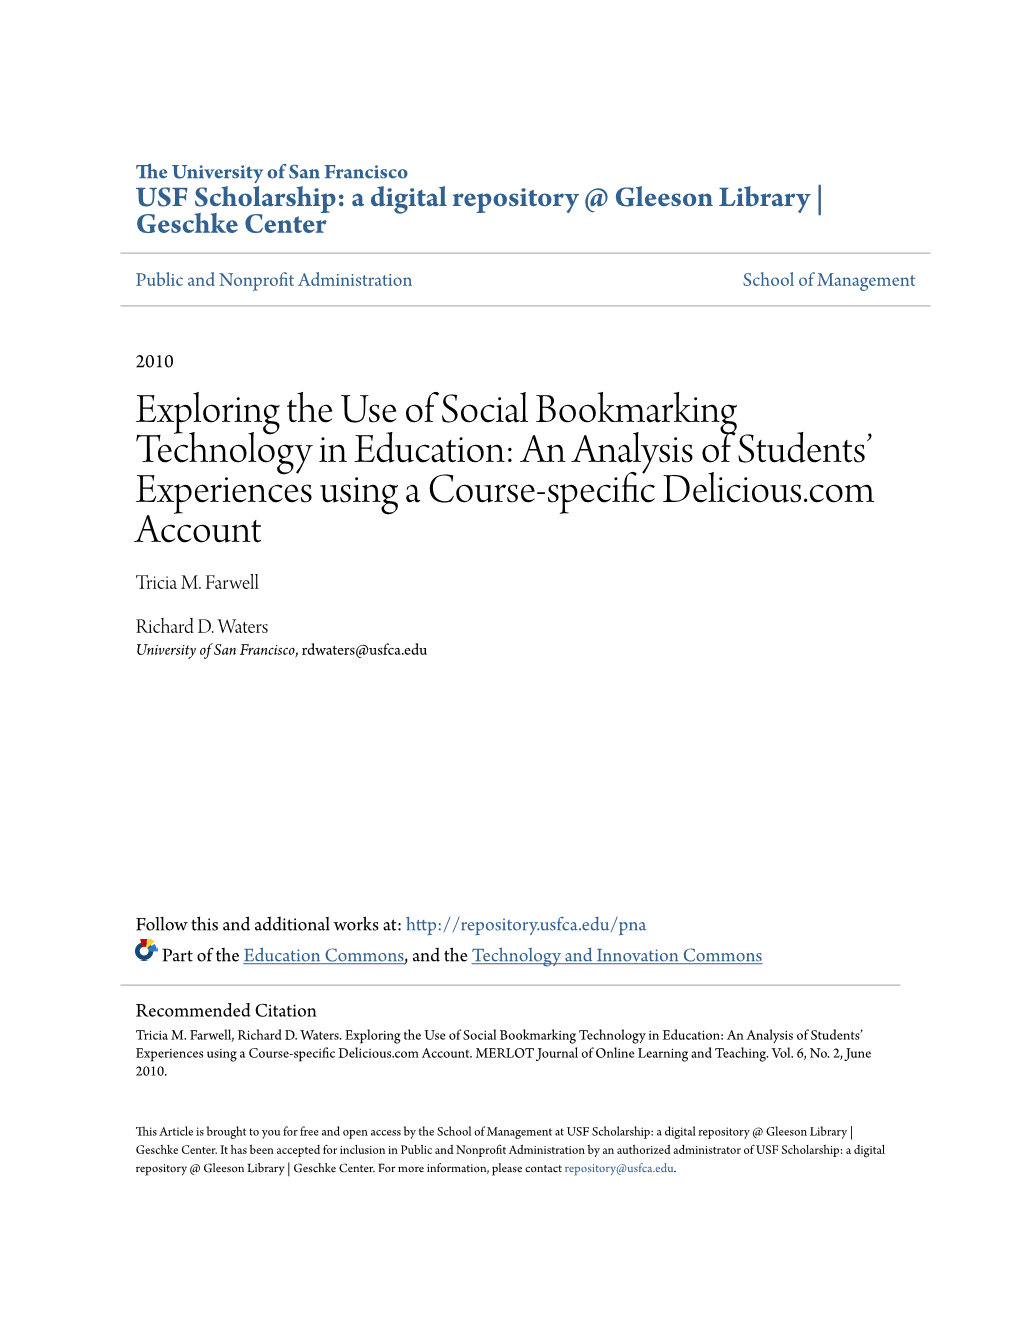 Exploring the Use of Social Bookmarking Technology in Education: an Analysis of Students’ Experiences Using a Course-Specific Elicd Ious.Com Account Tricia M